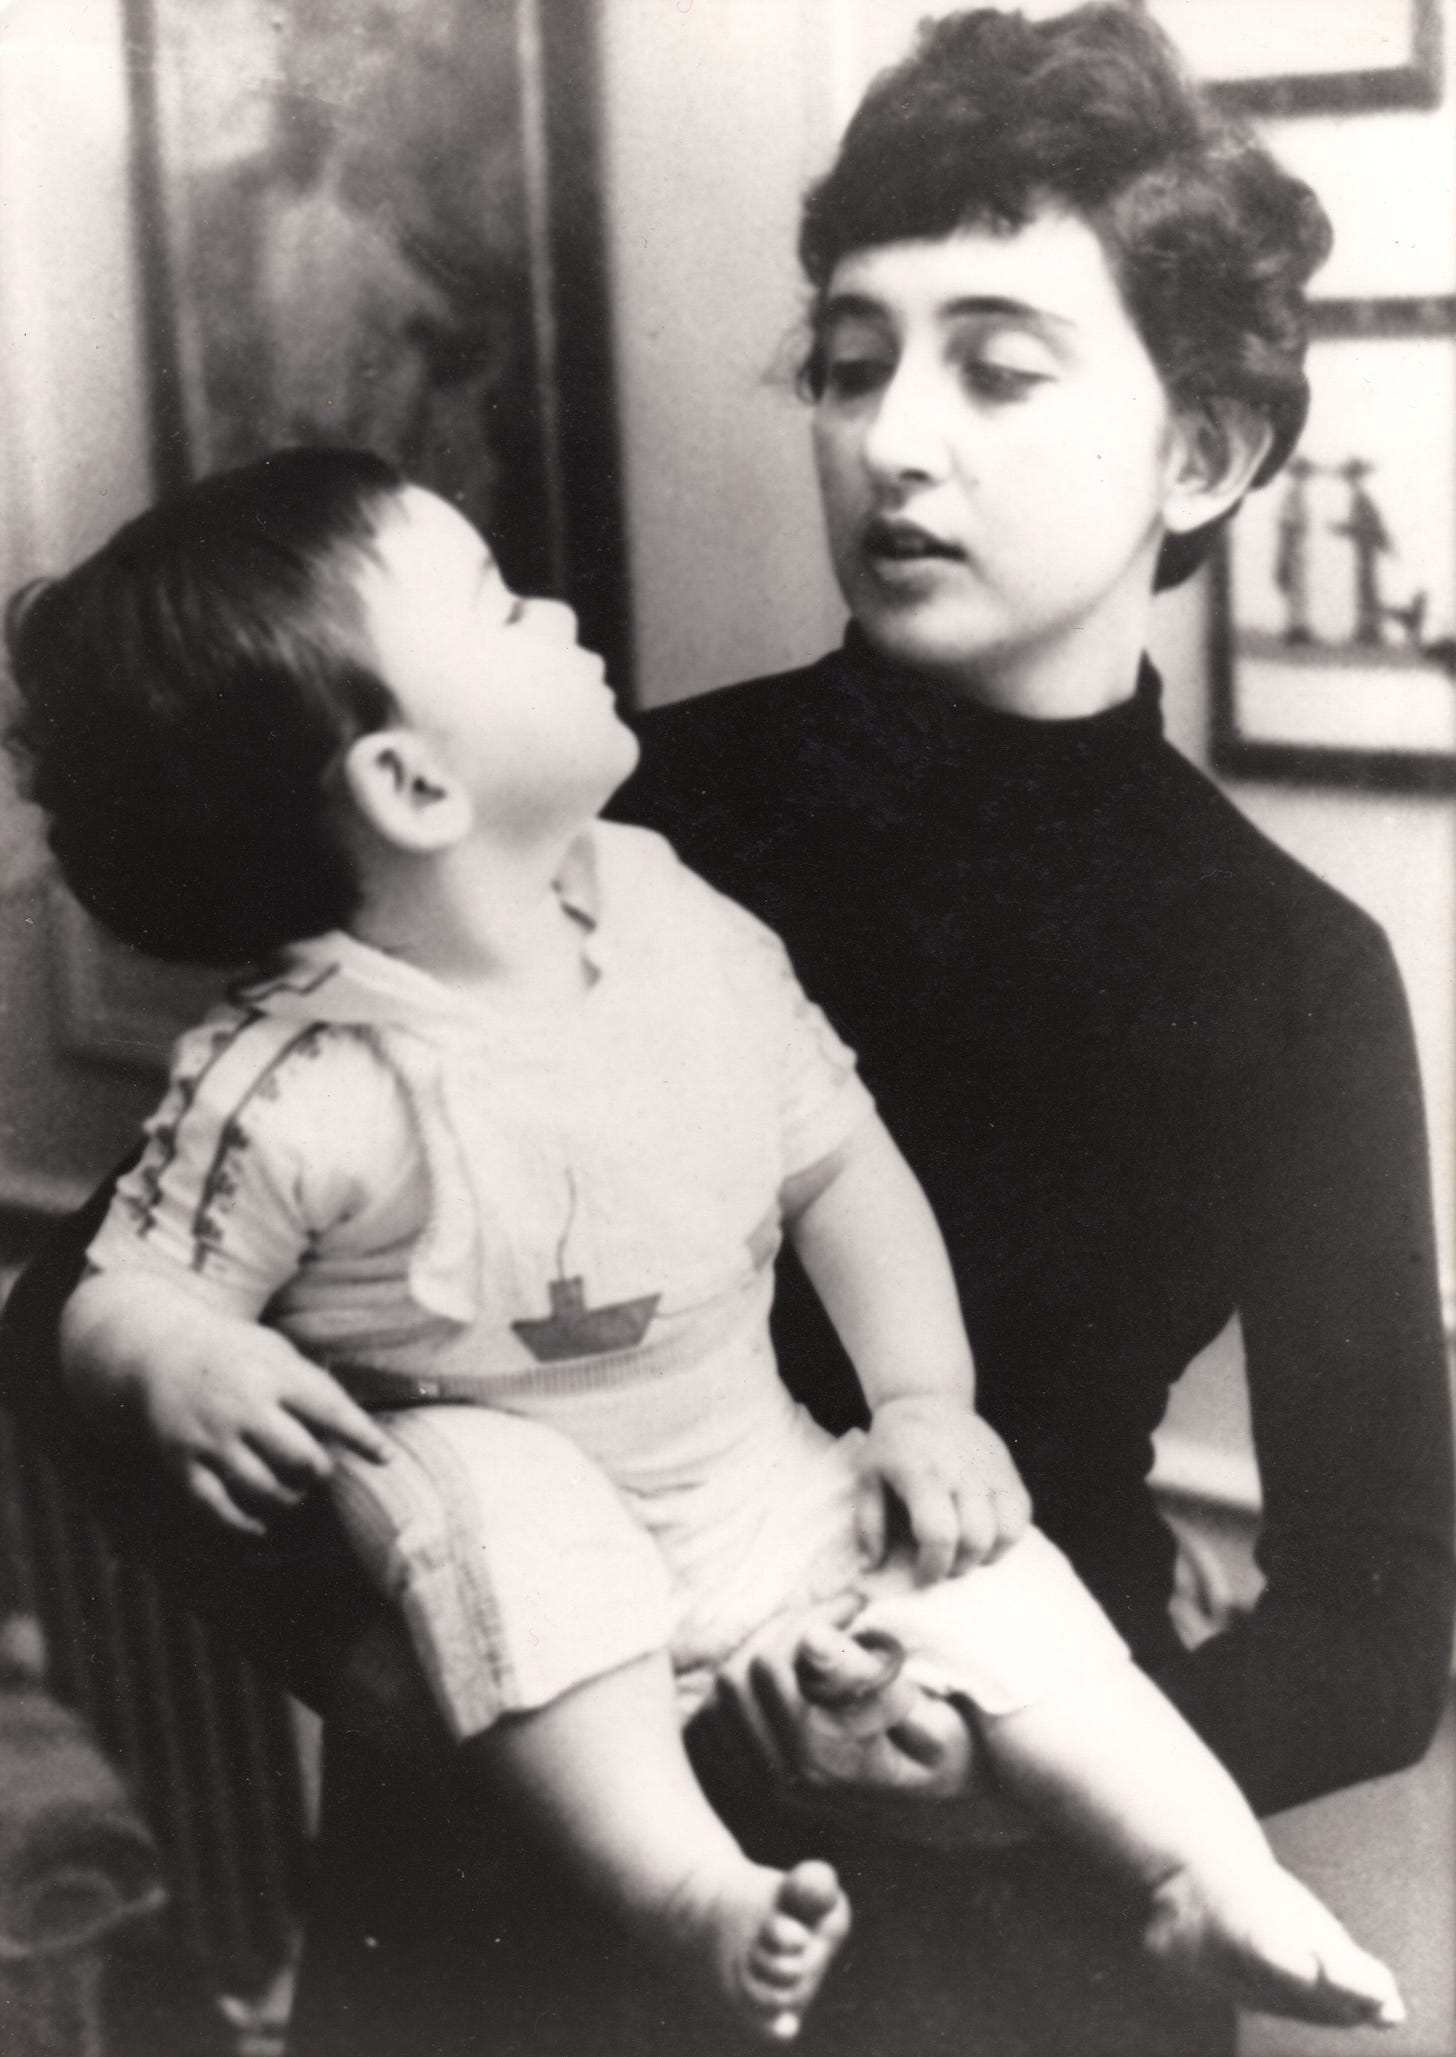 My beautiful mom, in her early 30s, holding baby me. We are looking into each other's eyes.